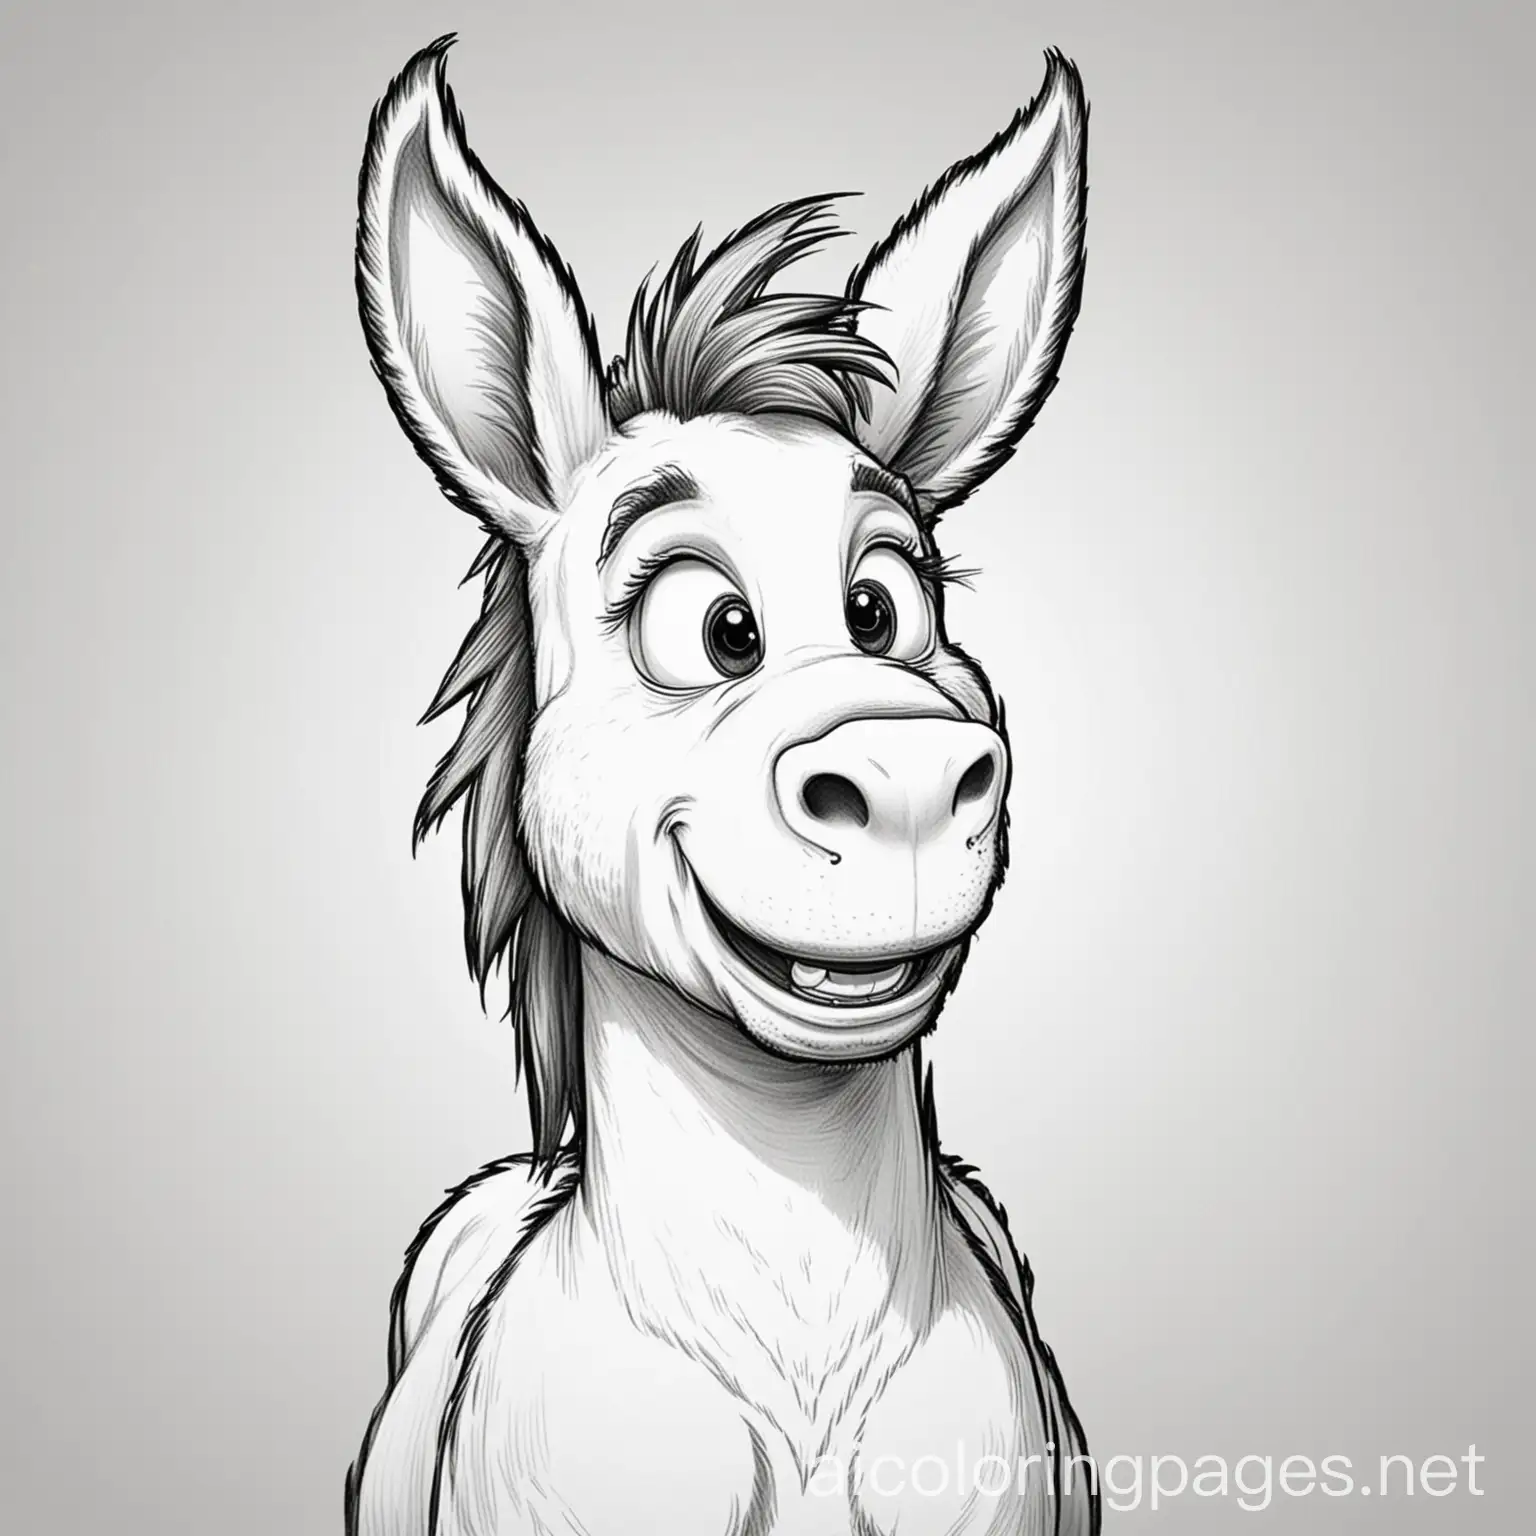 Happy-White-Cartoon-Donkey-Coloring-Page